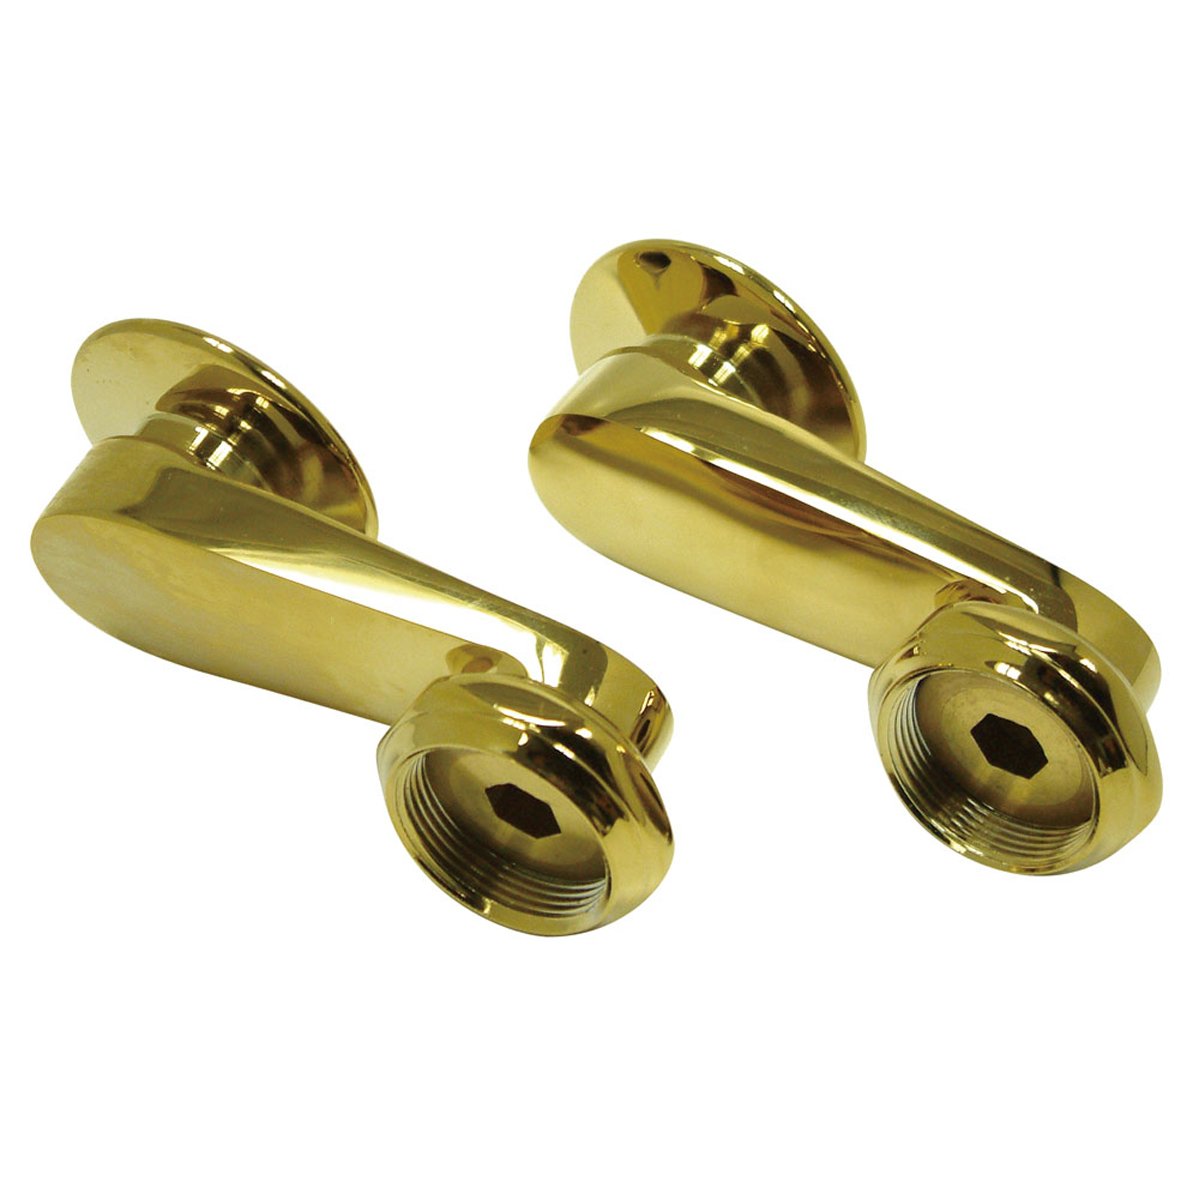 Kingston Brass Vintage Swivel Elbows for Clawfoot Tub Faucet-Bathroom Accessories-Free Shipping-Directsinks.